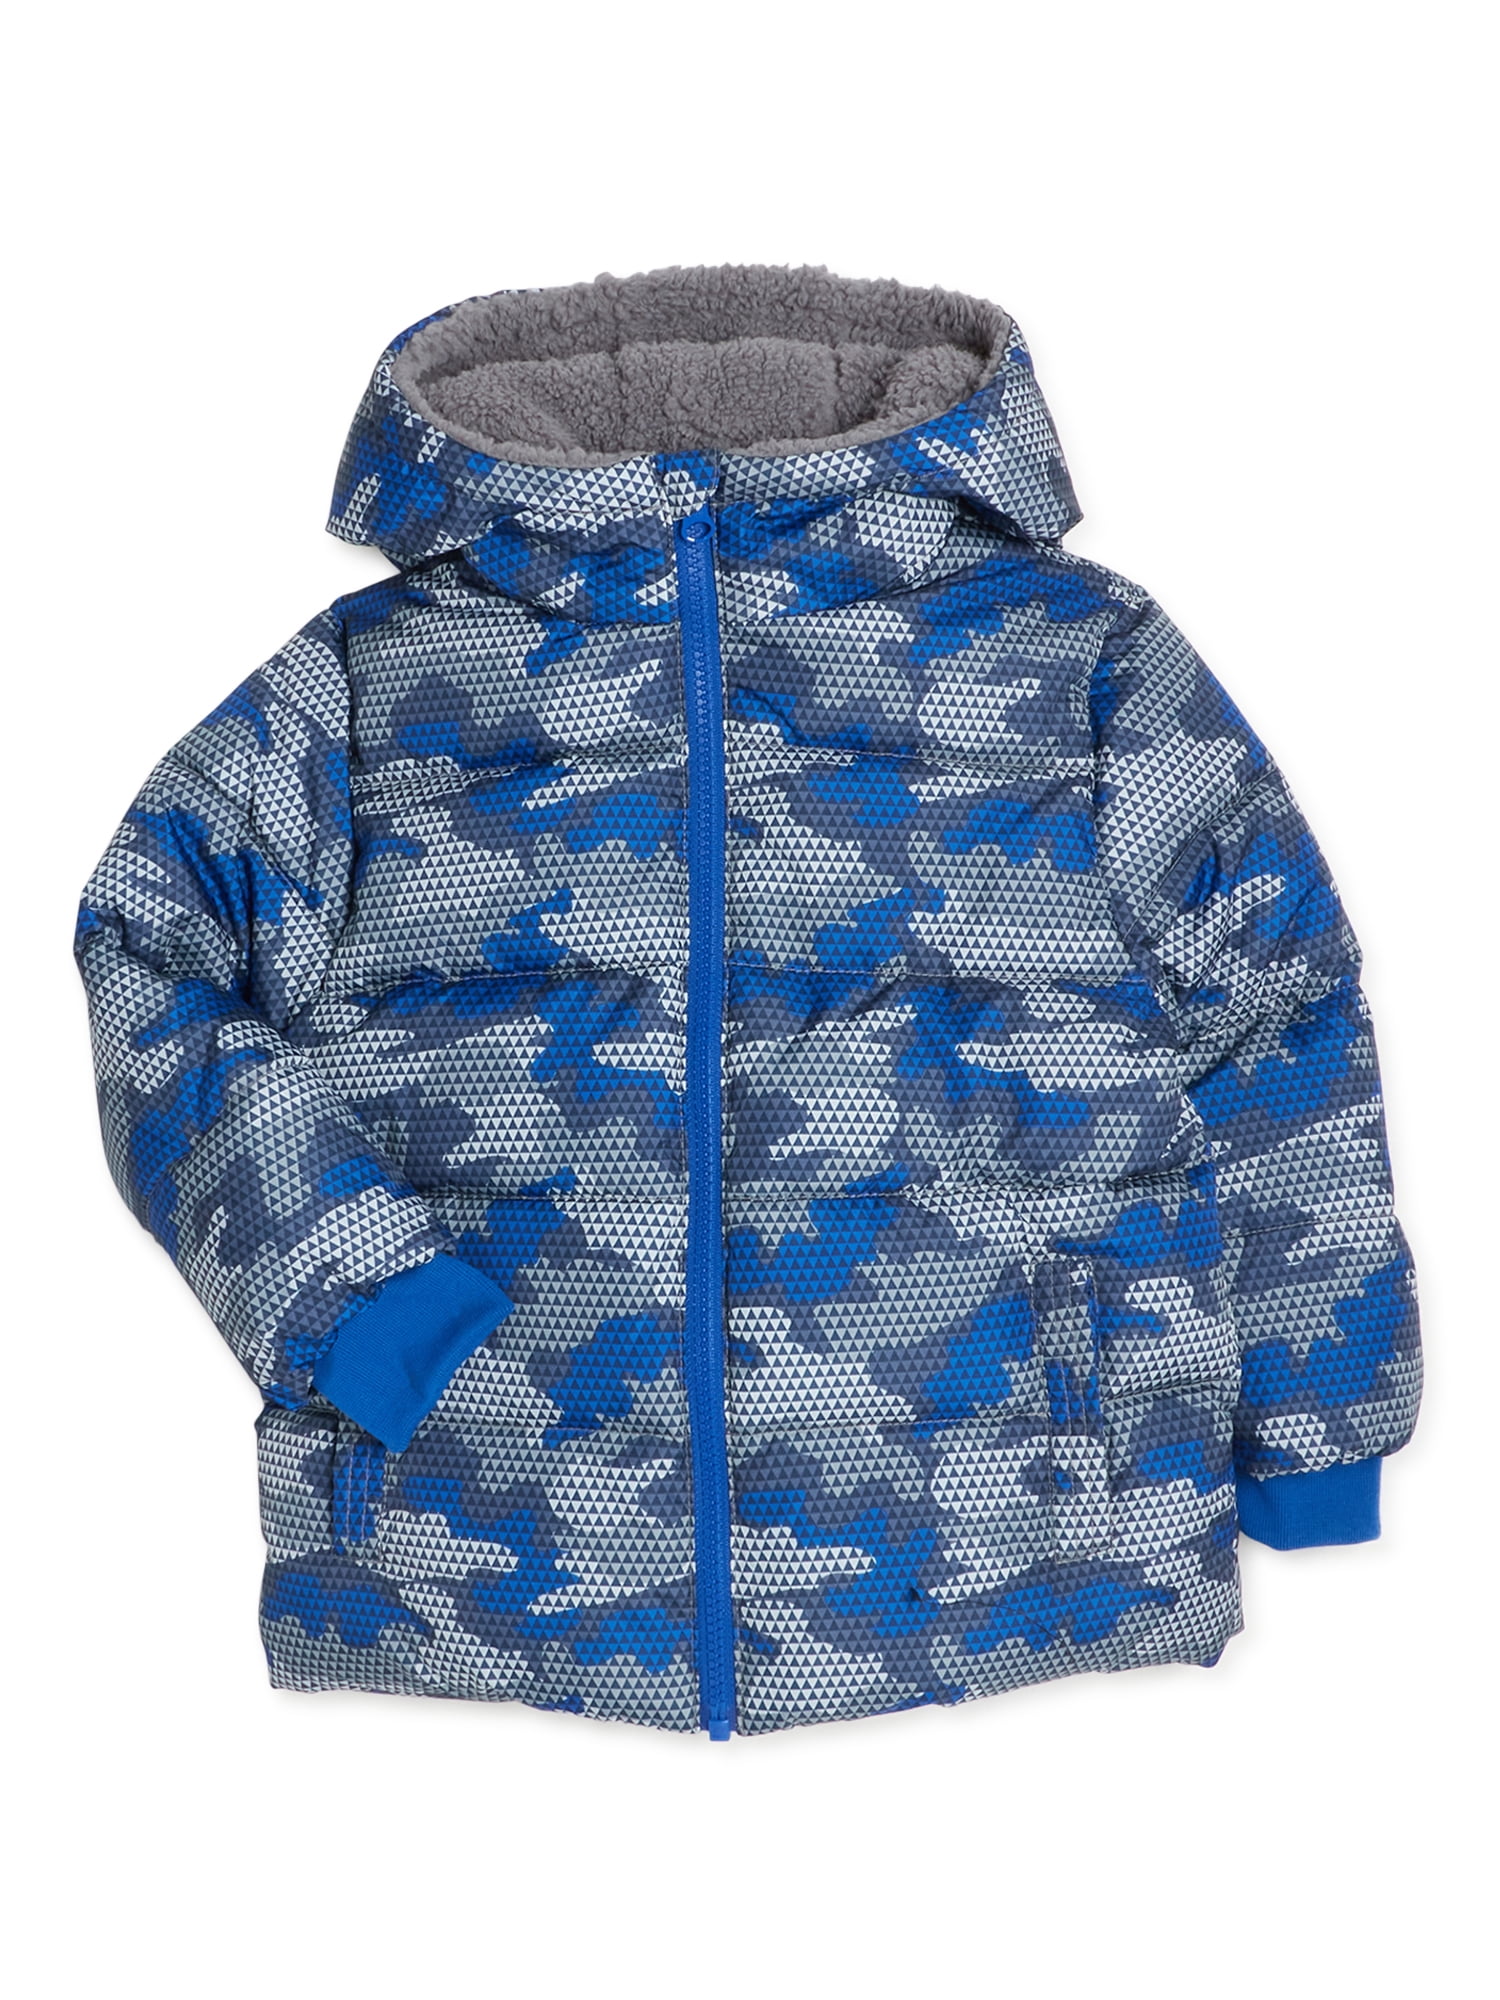 Kids Boys Fur Hooded Coat Camouflage Cotton Down Jackets Baby Winter Parka Coats 